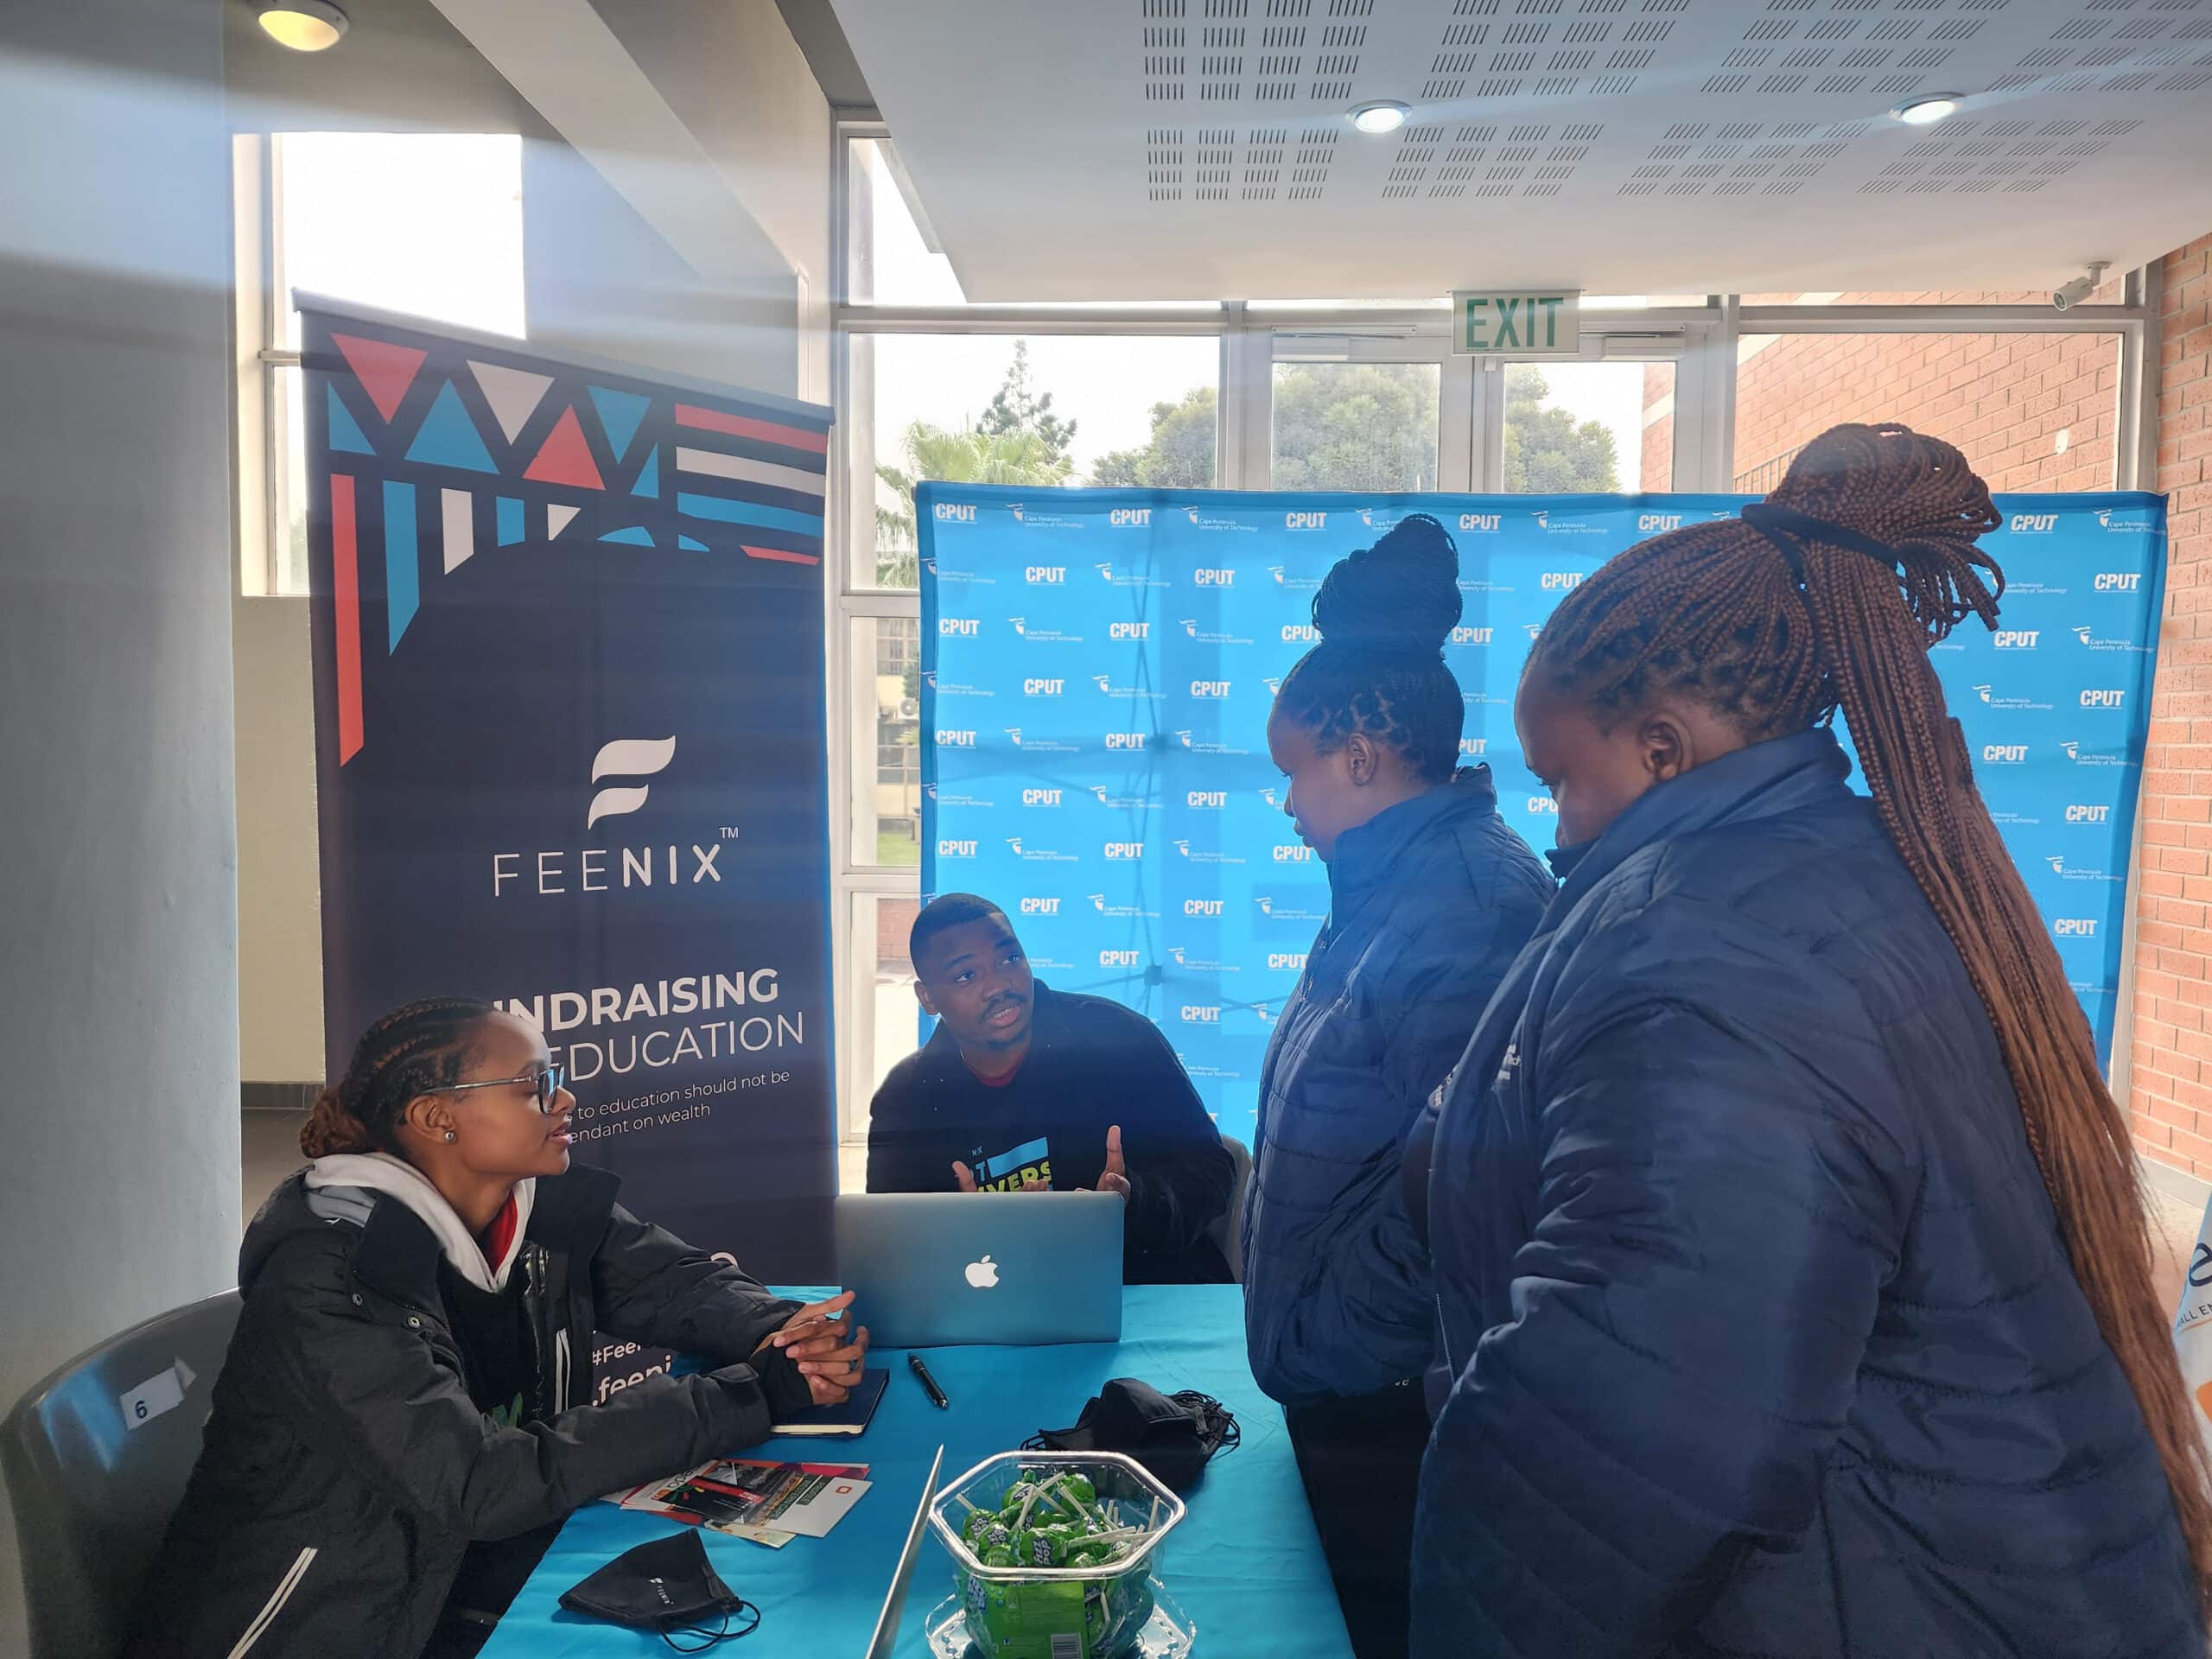 Students talking with Feenix team members at a stand.